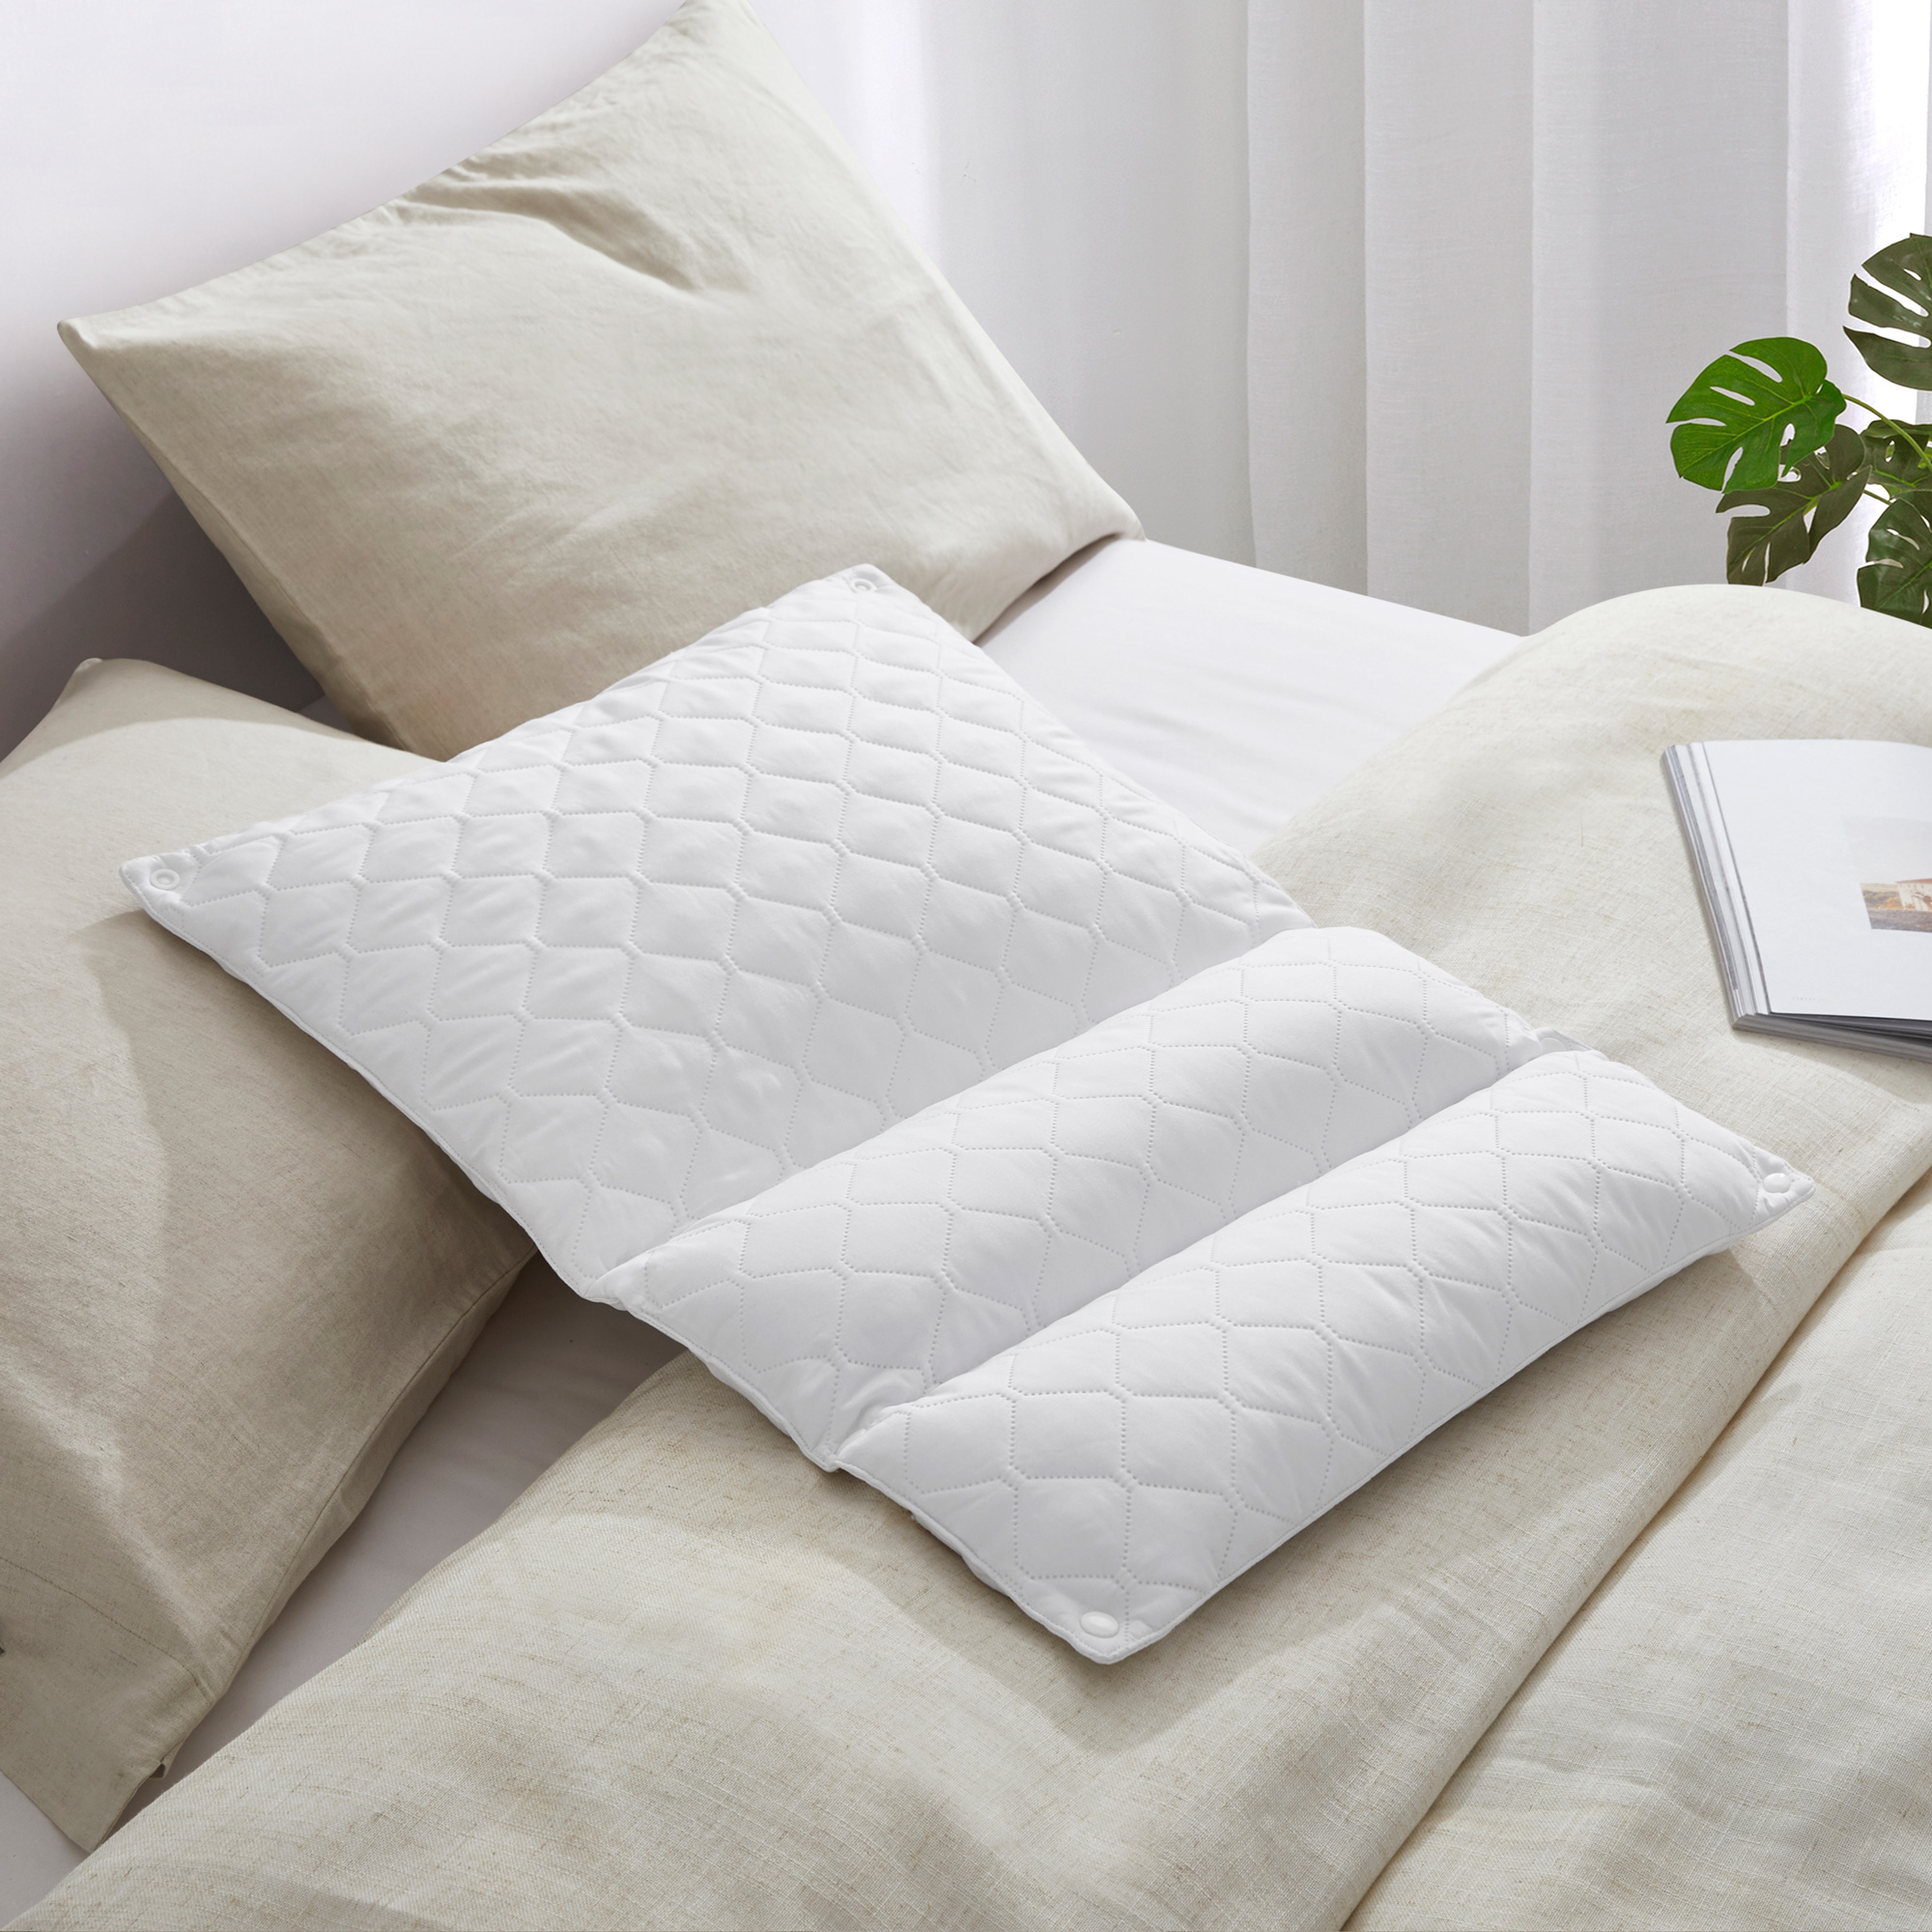 Adjustable Folding Polyester Pillow - White, Standard/Queen